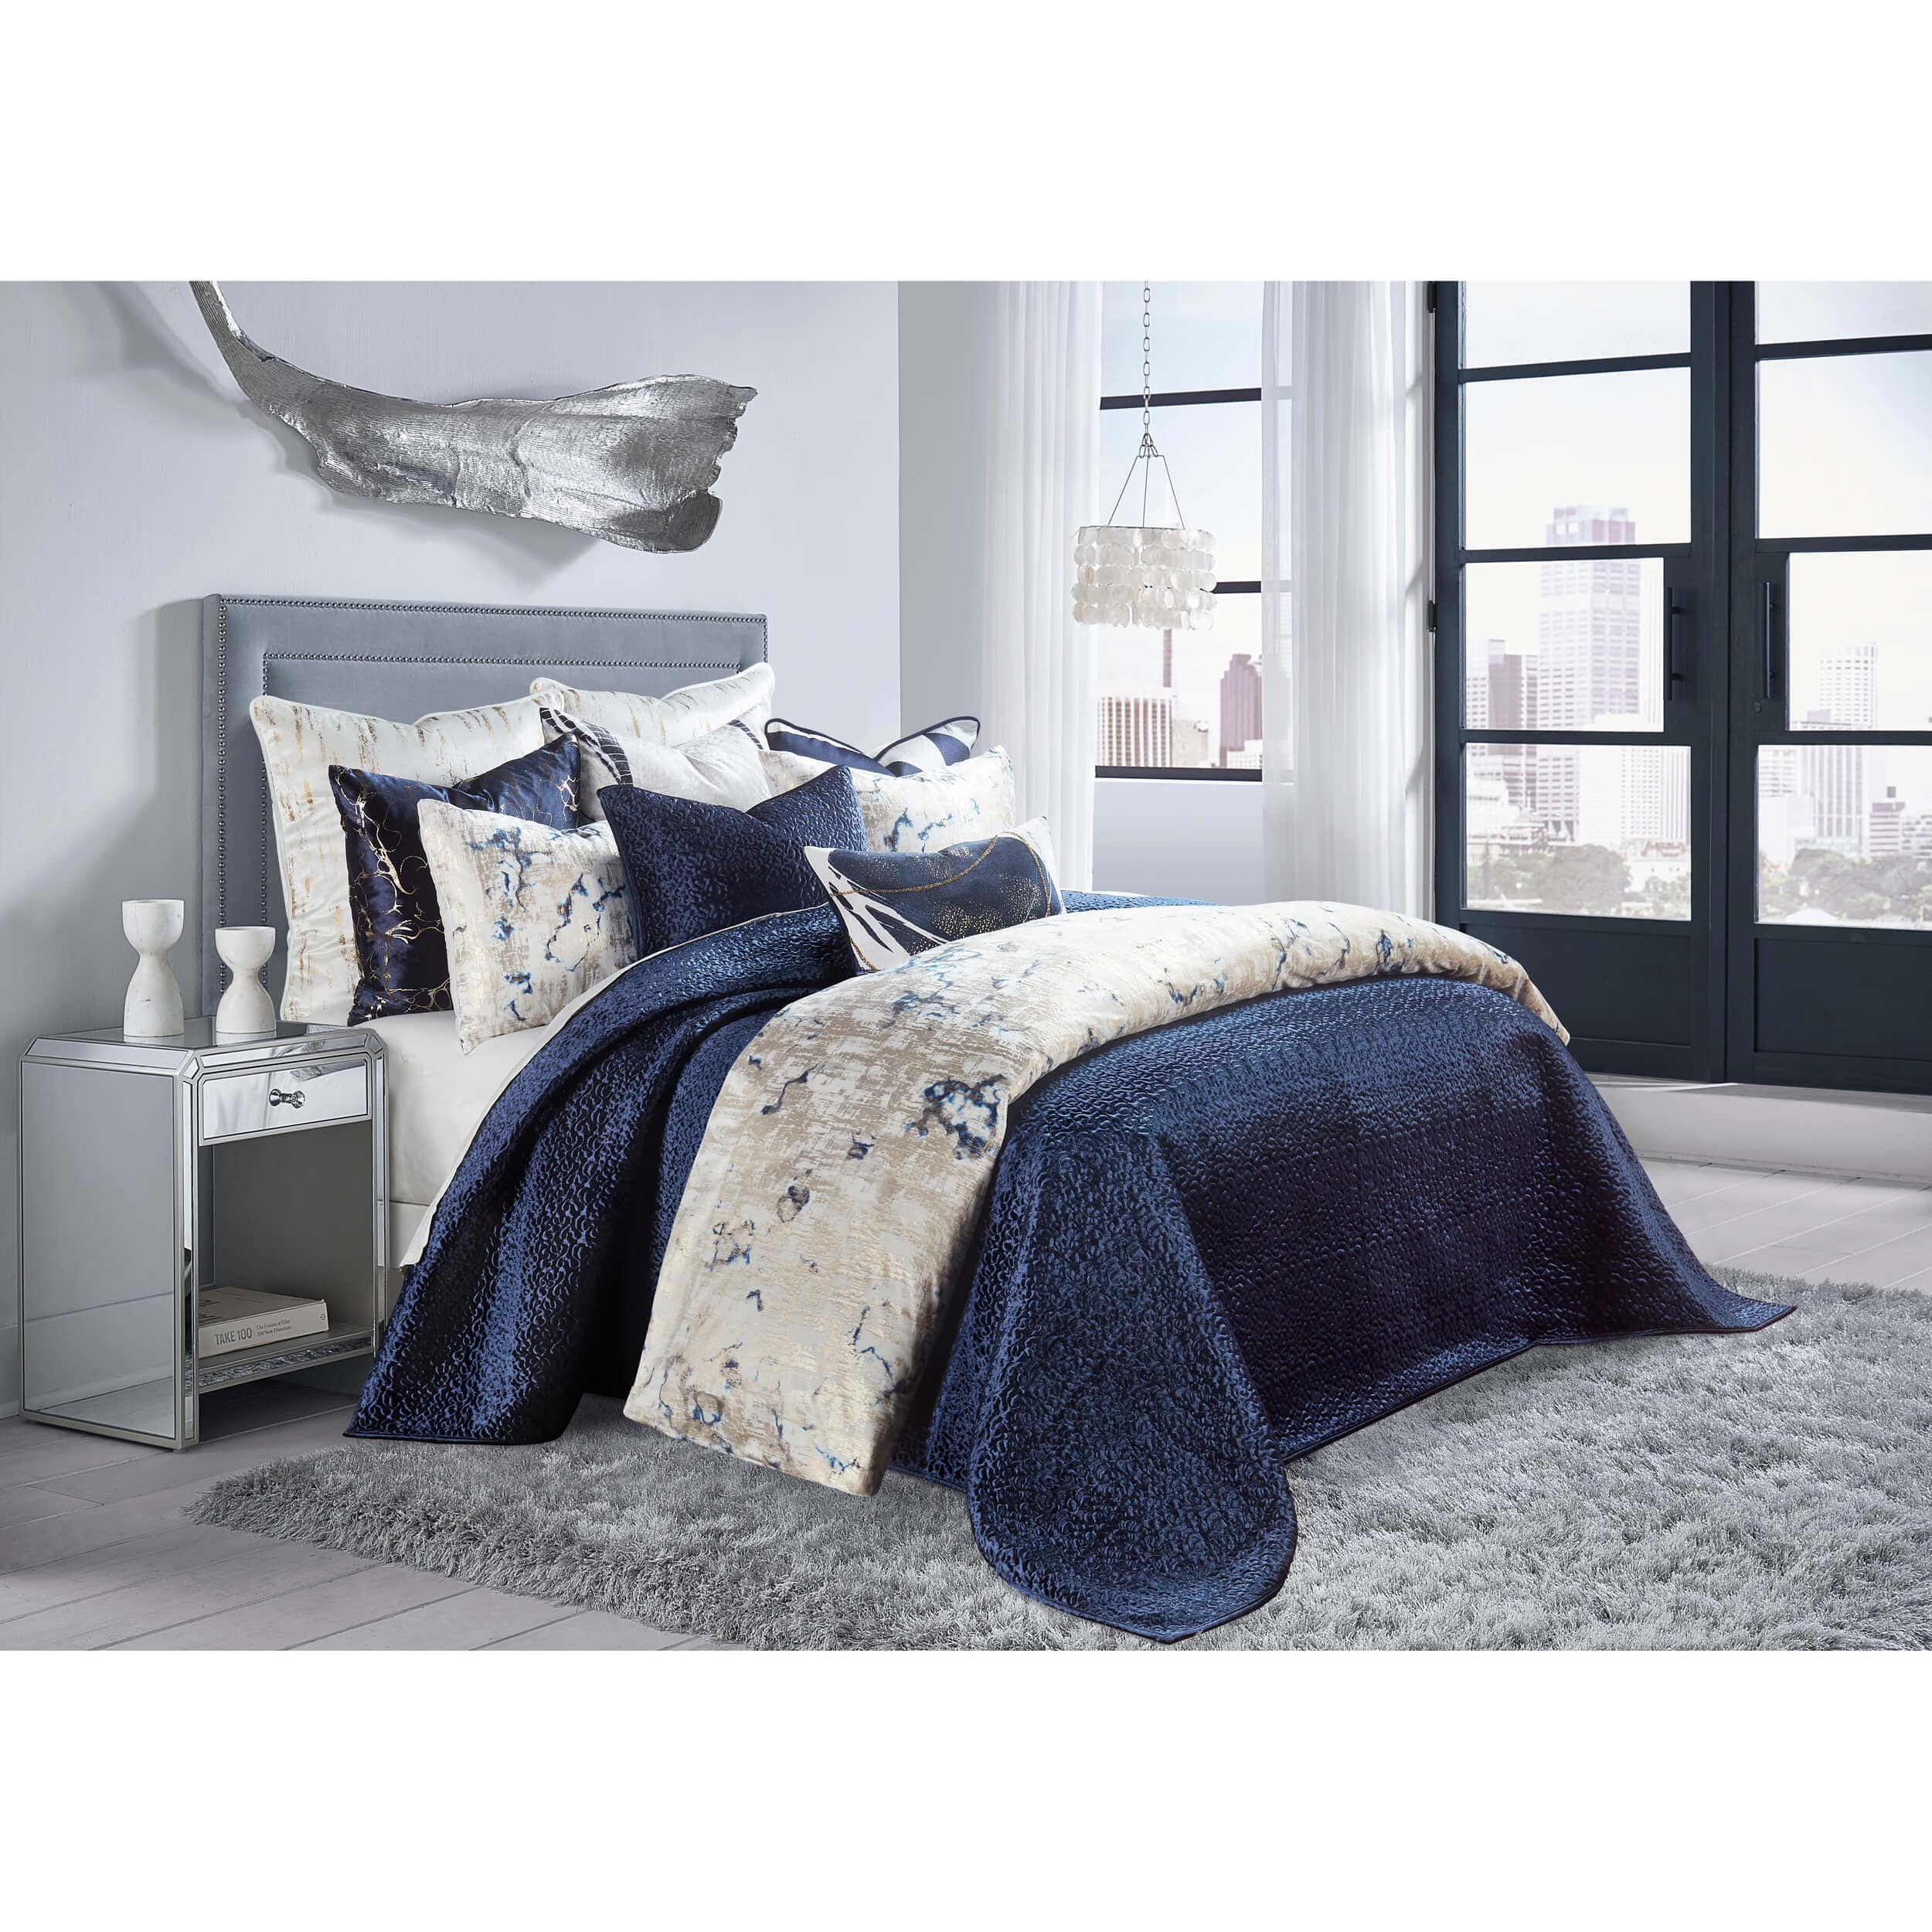 Image of Sayra Quilt, Navy